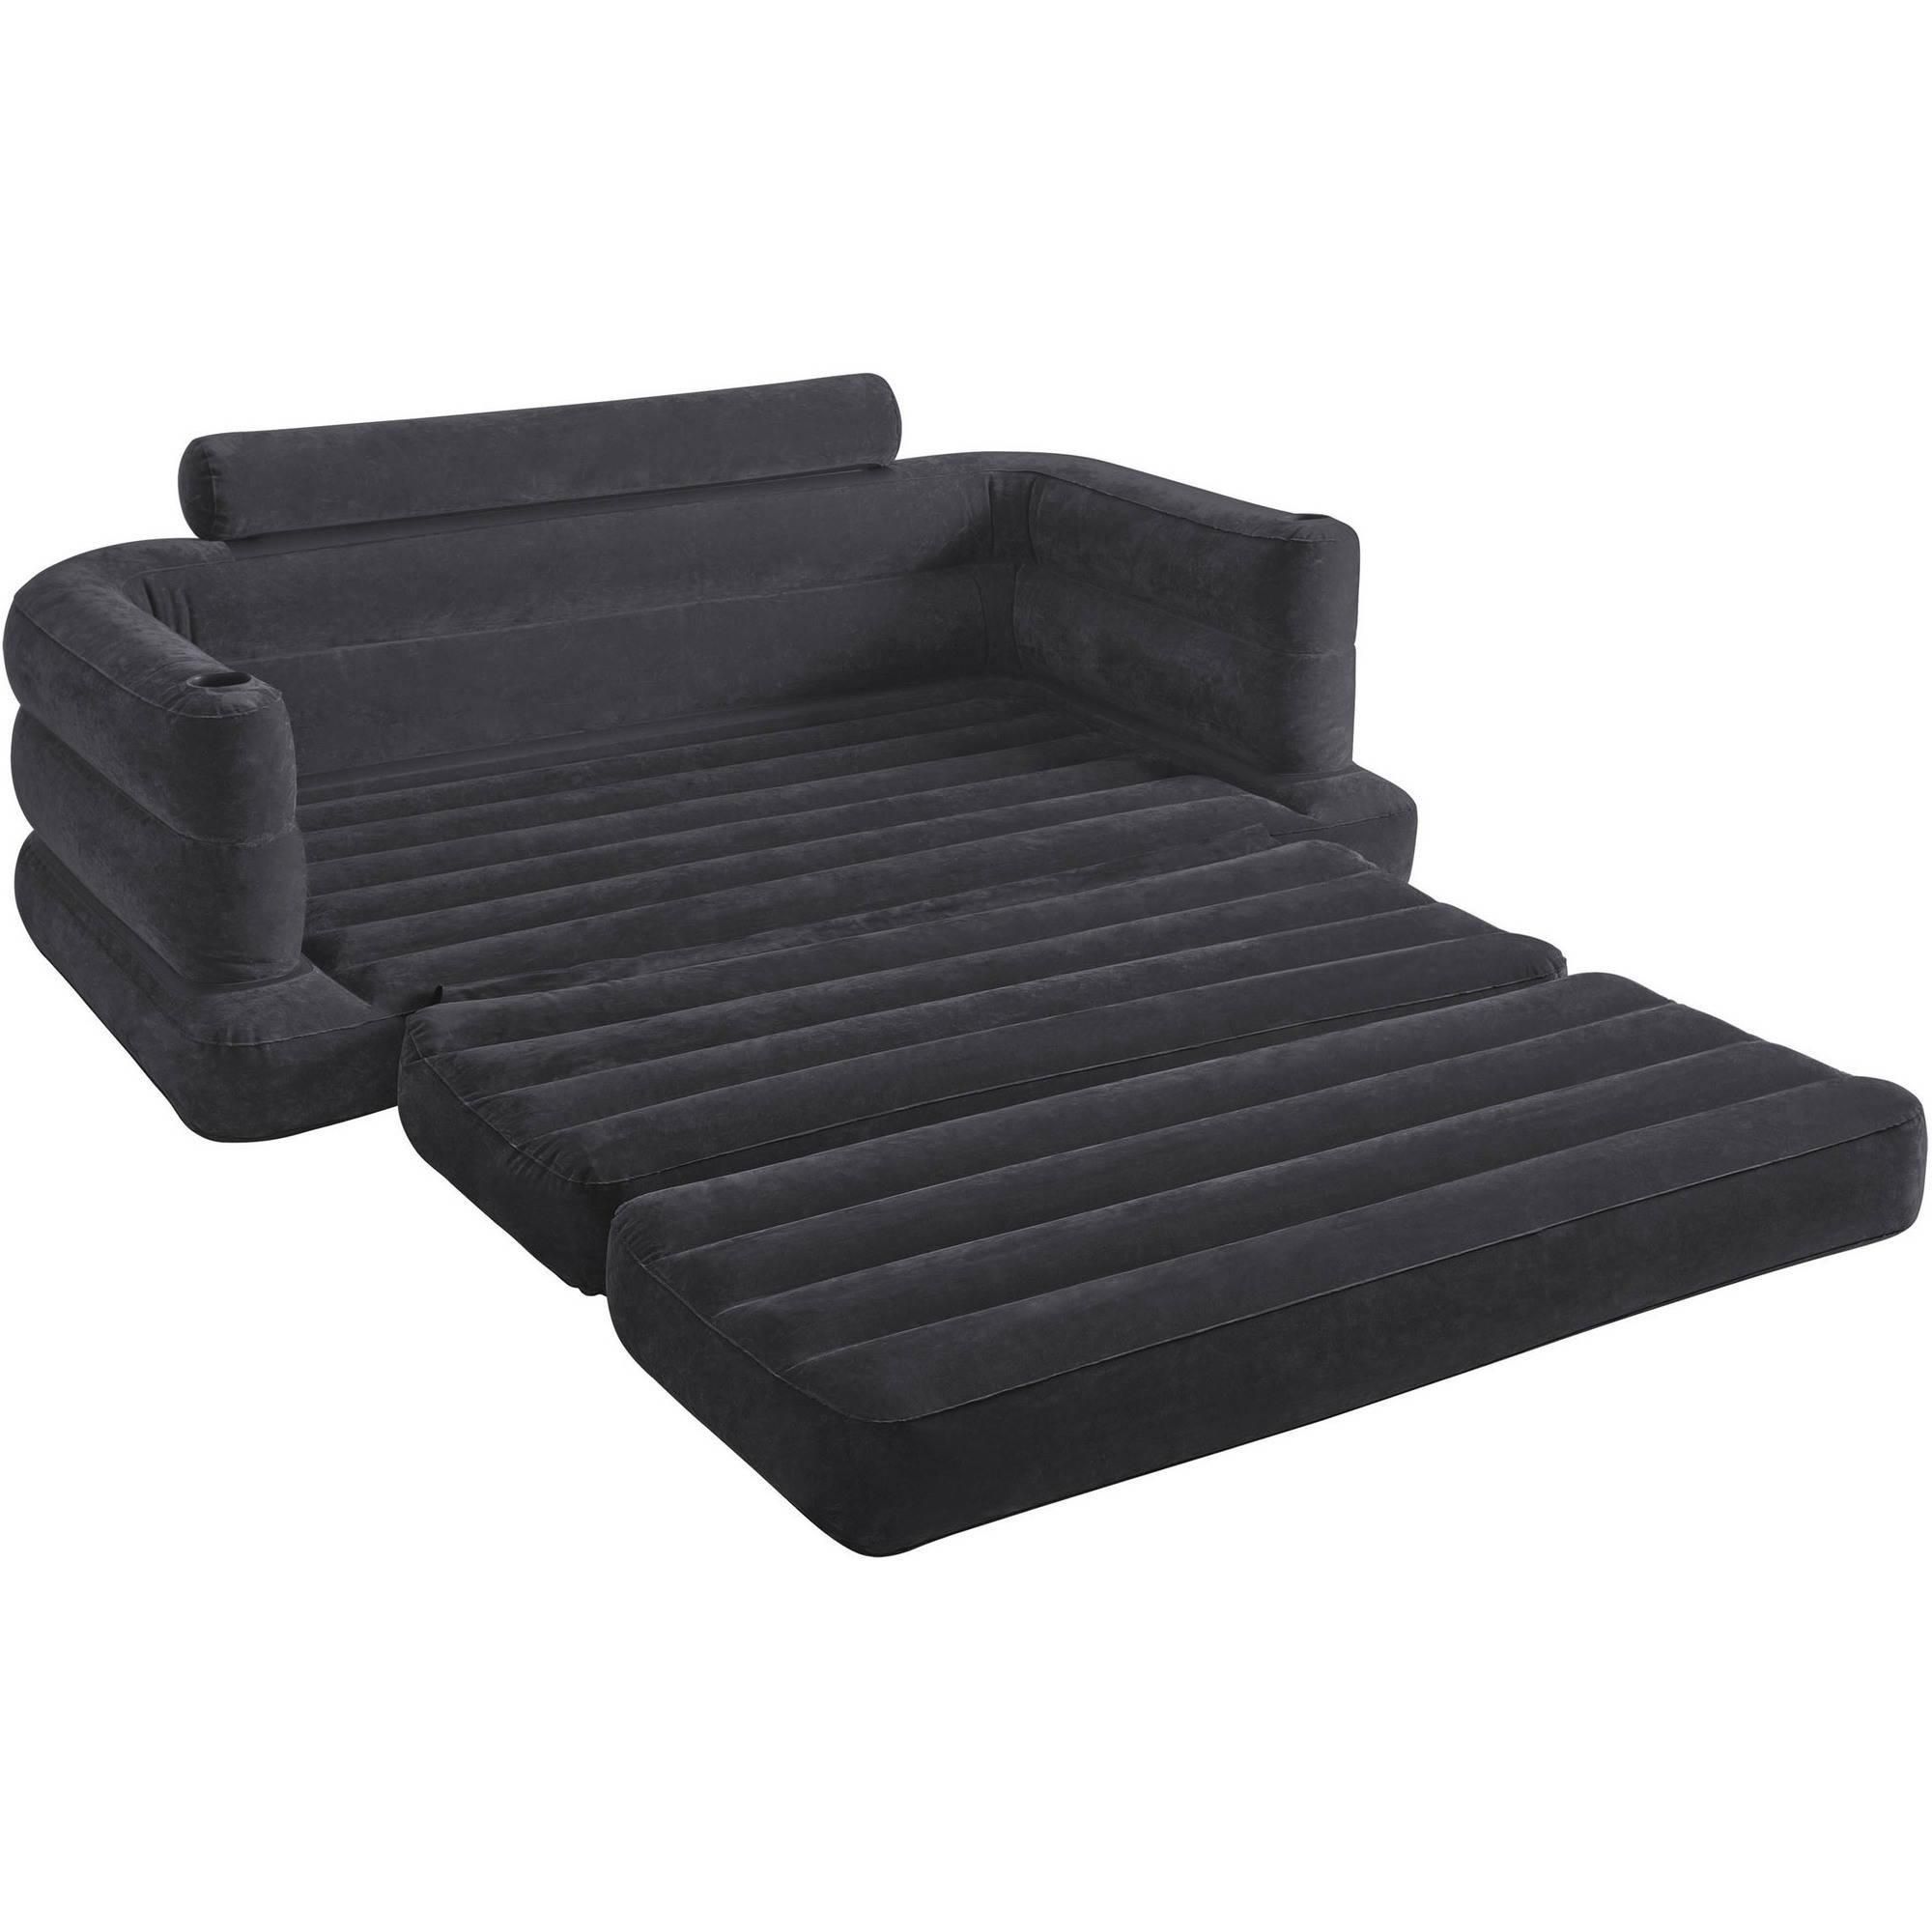 Intex Sofa Bed, Dark Grey | Ebay Within Intex Inflatable Pull Out Sofas (View 12 of 20)